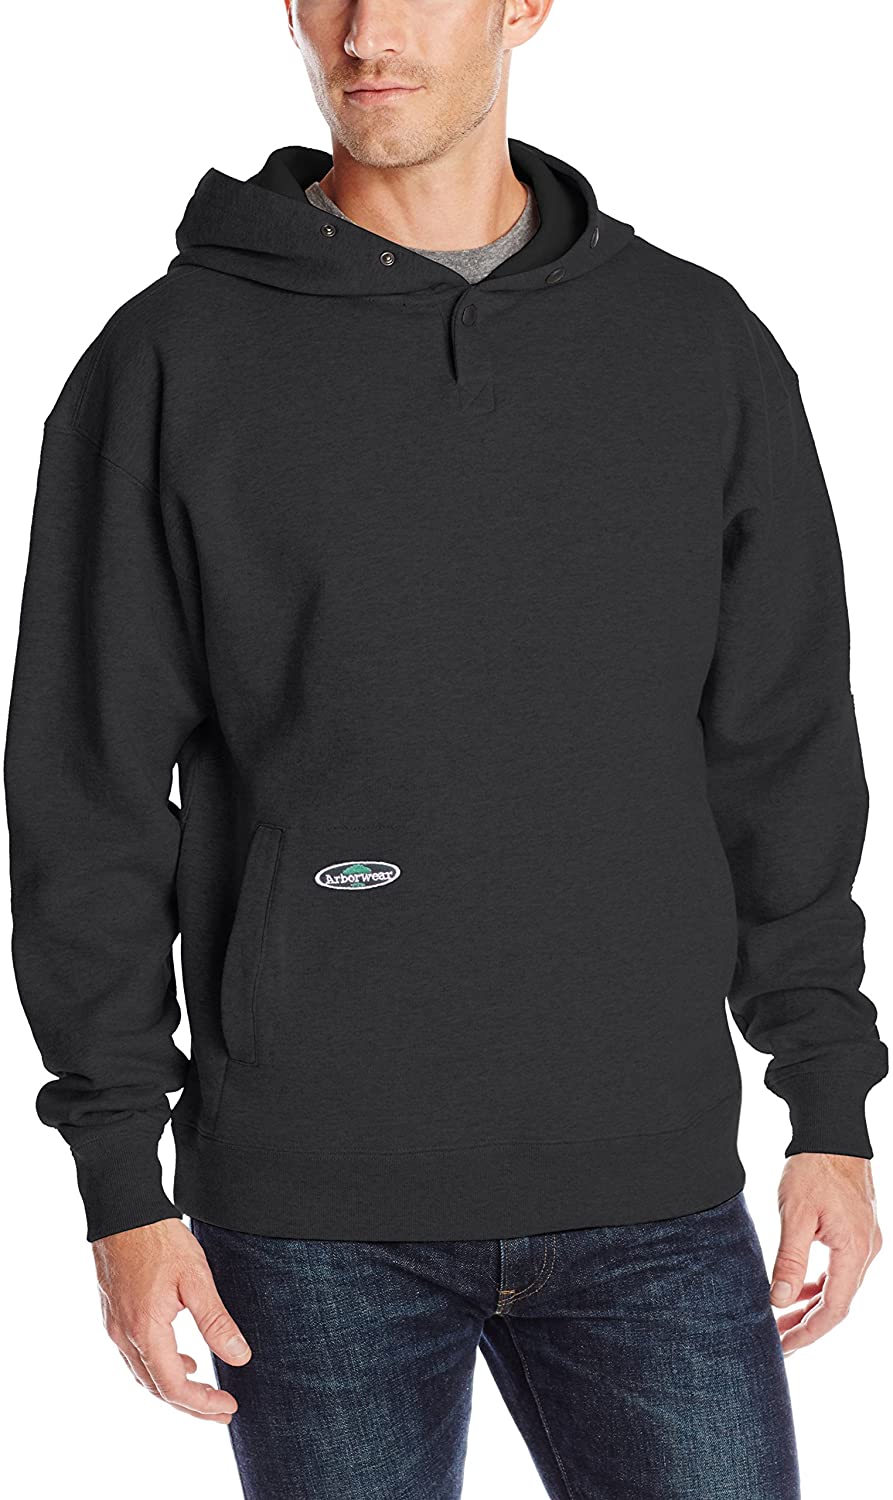 Arborwear Men's Single Thick Pullover Sweatshirt in Black from the from